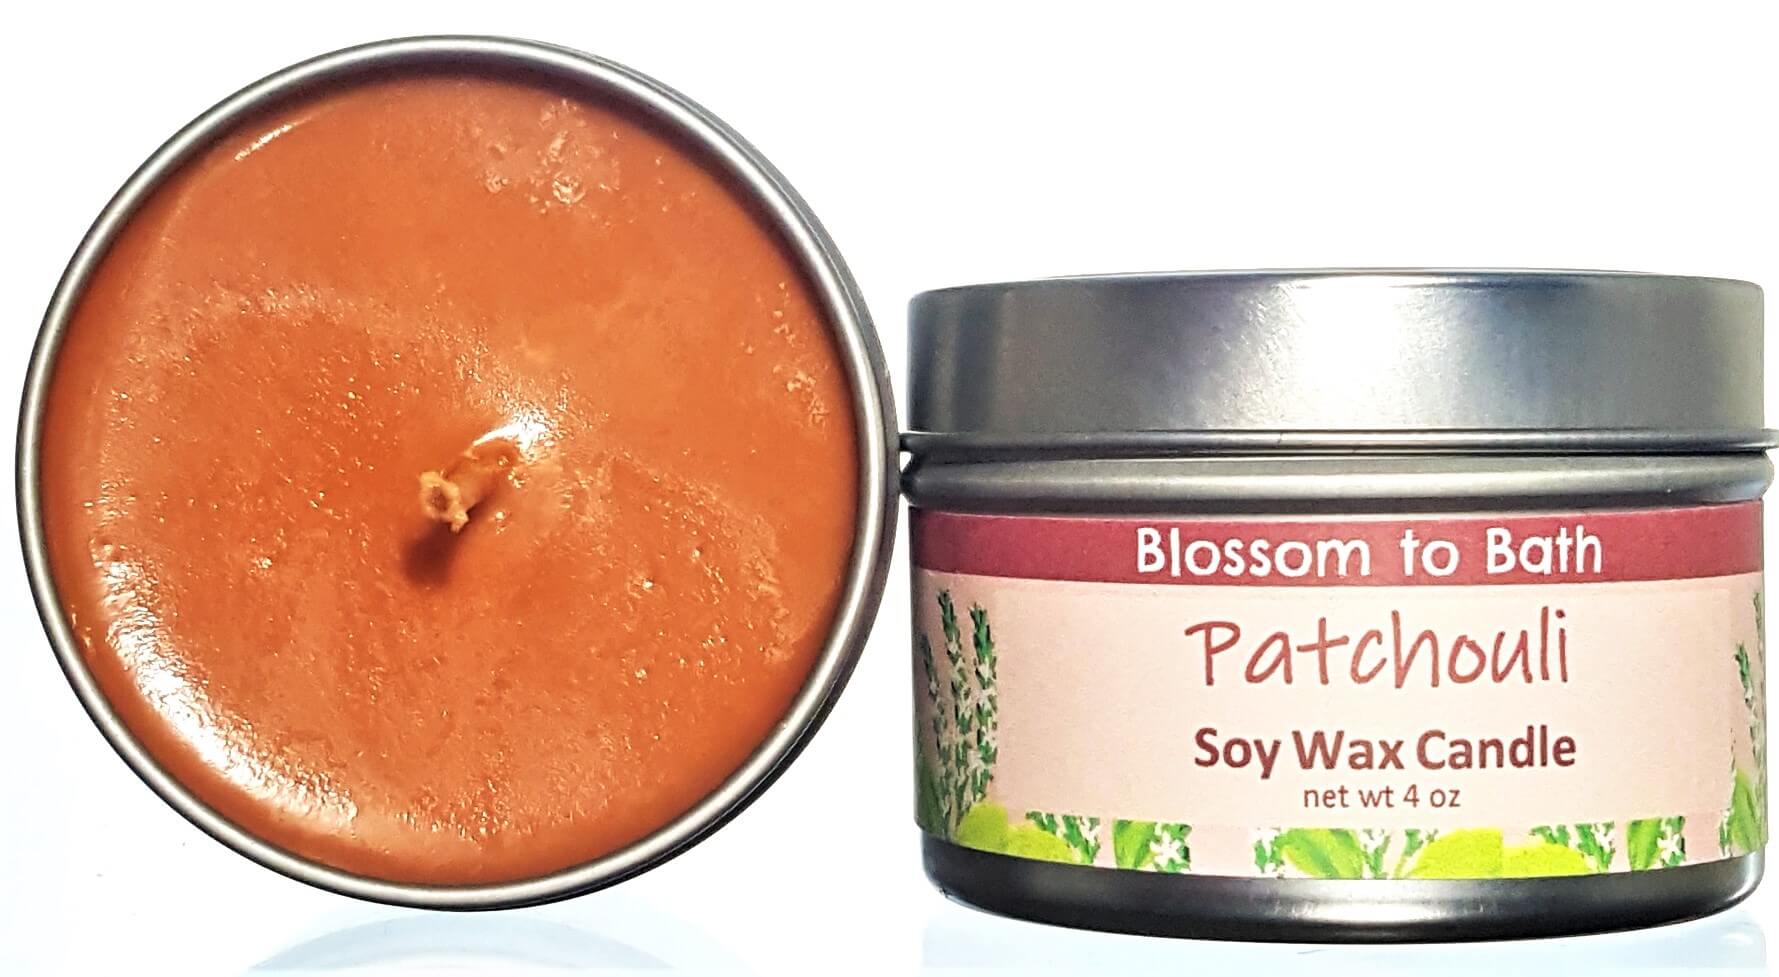 Buy Blossom to Bath Patchouli Soy Wax Candle from Flowersong Soap Studio.  Fill the air with a charming fragrance that lasts for hours  The pure earthy, woody, spicy scent of straight Patchouli.